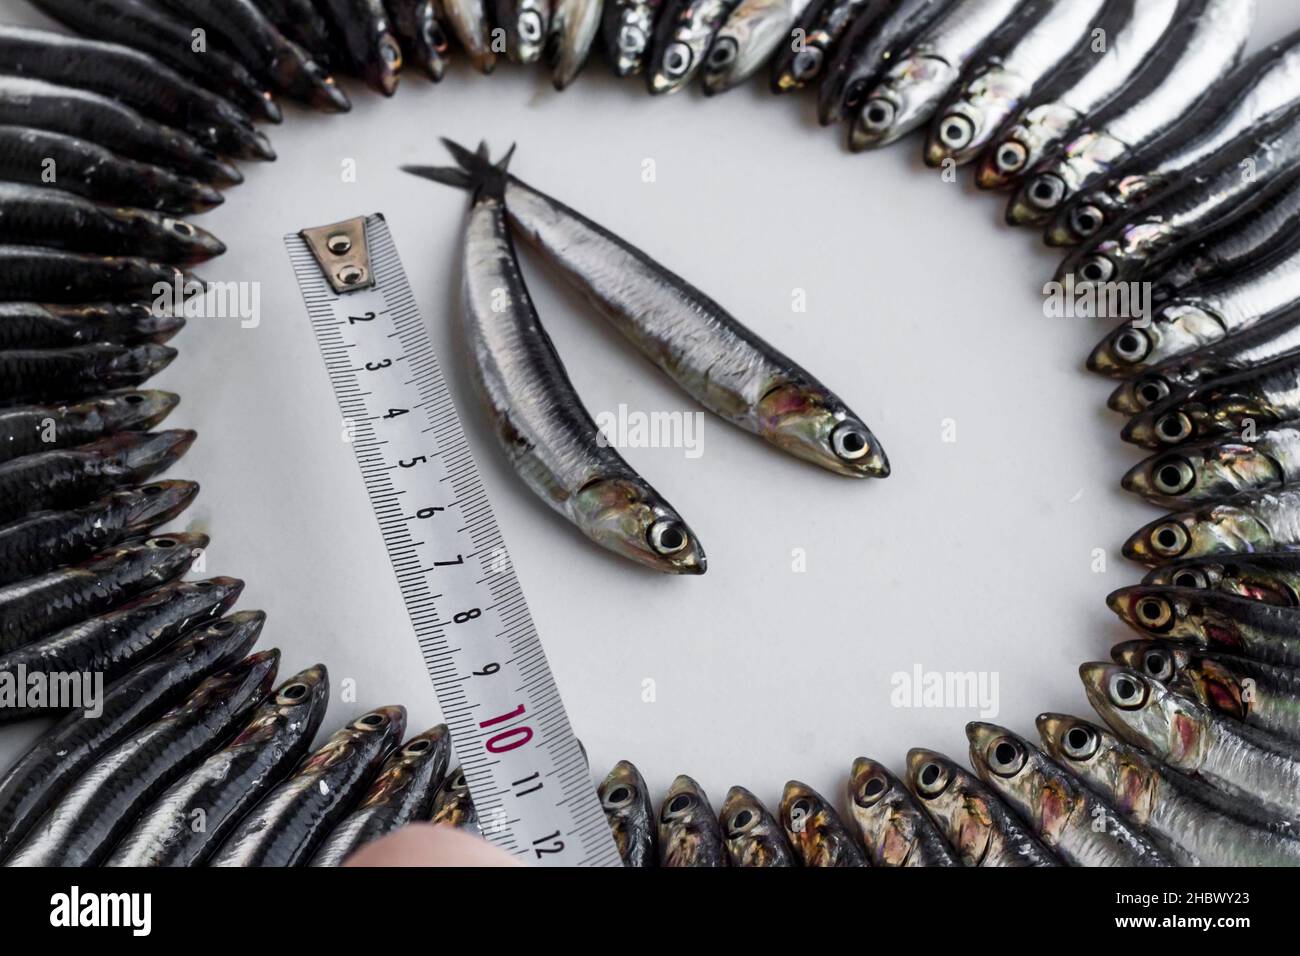 https://c8.alamy.com/comp/2HBWY23/small-fish-anchovyhamsi-measured-with-metal-tape-measure-2HBWY23.jpg